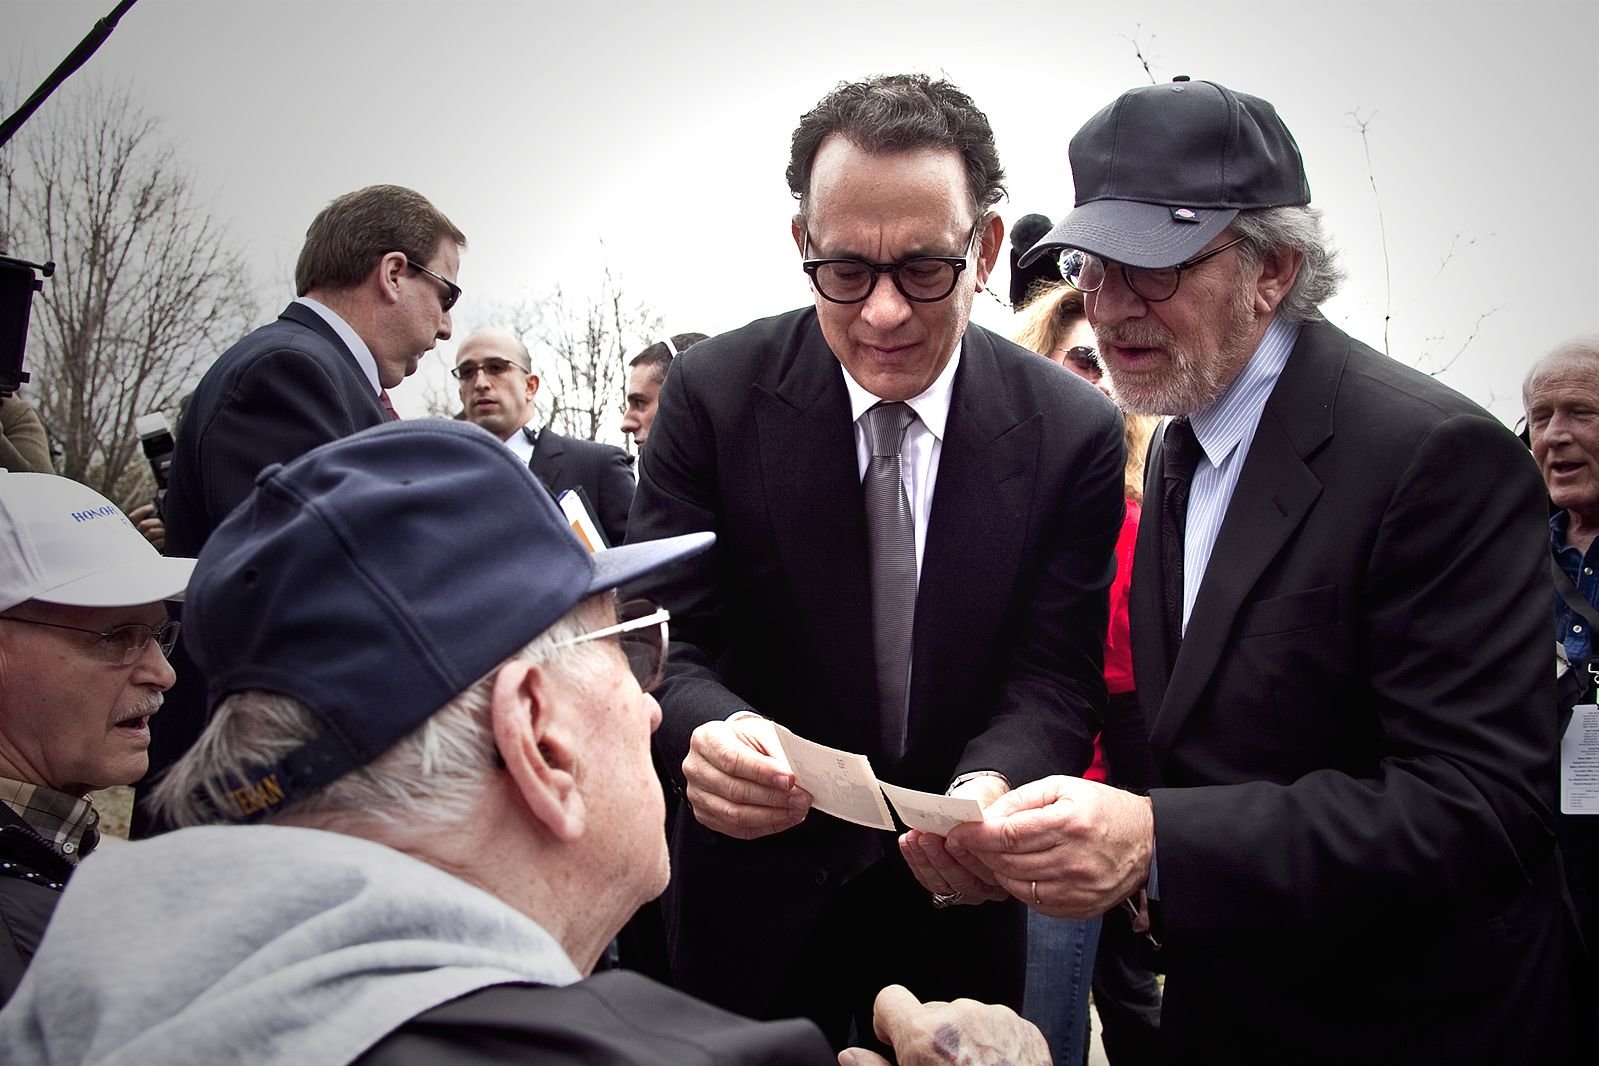 Masters of the Air, spielberg, hanks, wwii, world war ii